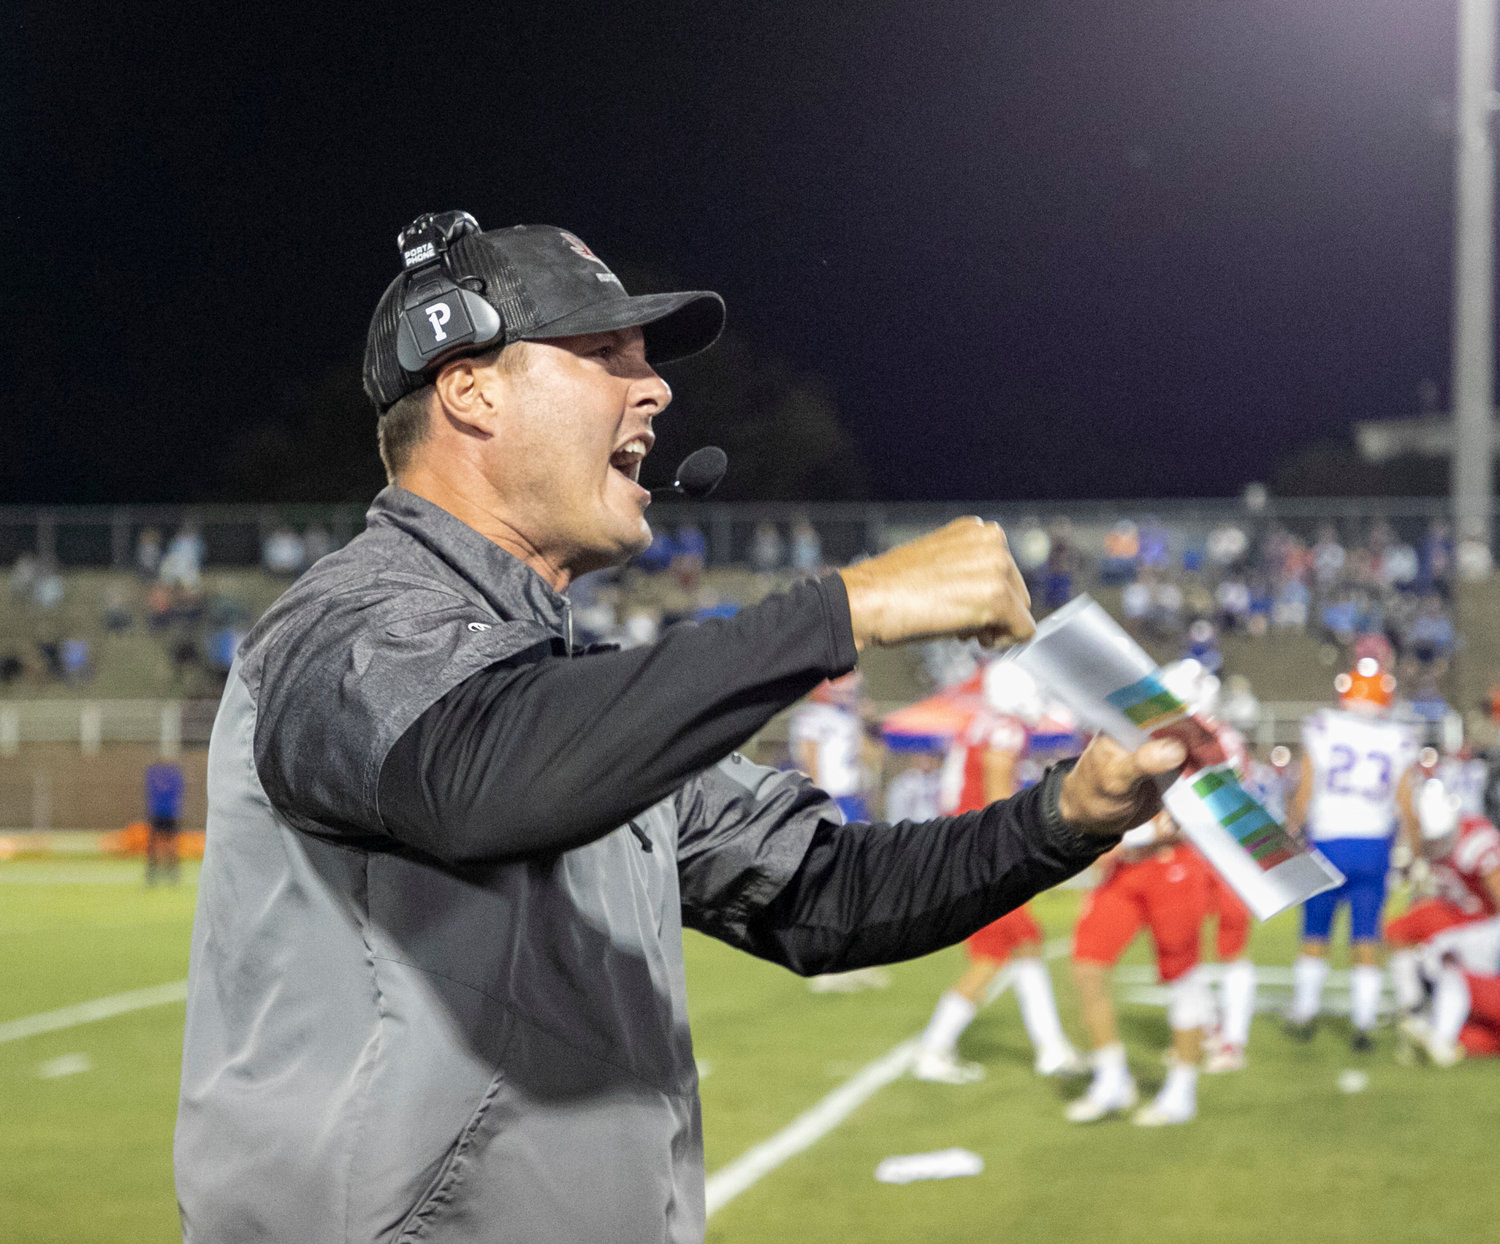 St. Michael head coach Philip Rivers celebrates a defensive turnover on downs in the first quarter of the Cardinals’ region tilt with the Orange Beach Makos Thursday at Fairhope Municipal Stadium. St. Michael won 49-41.